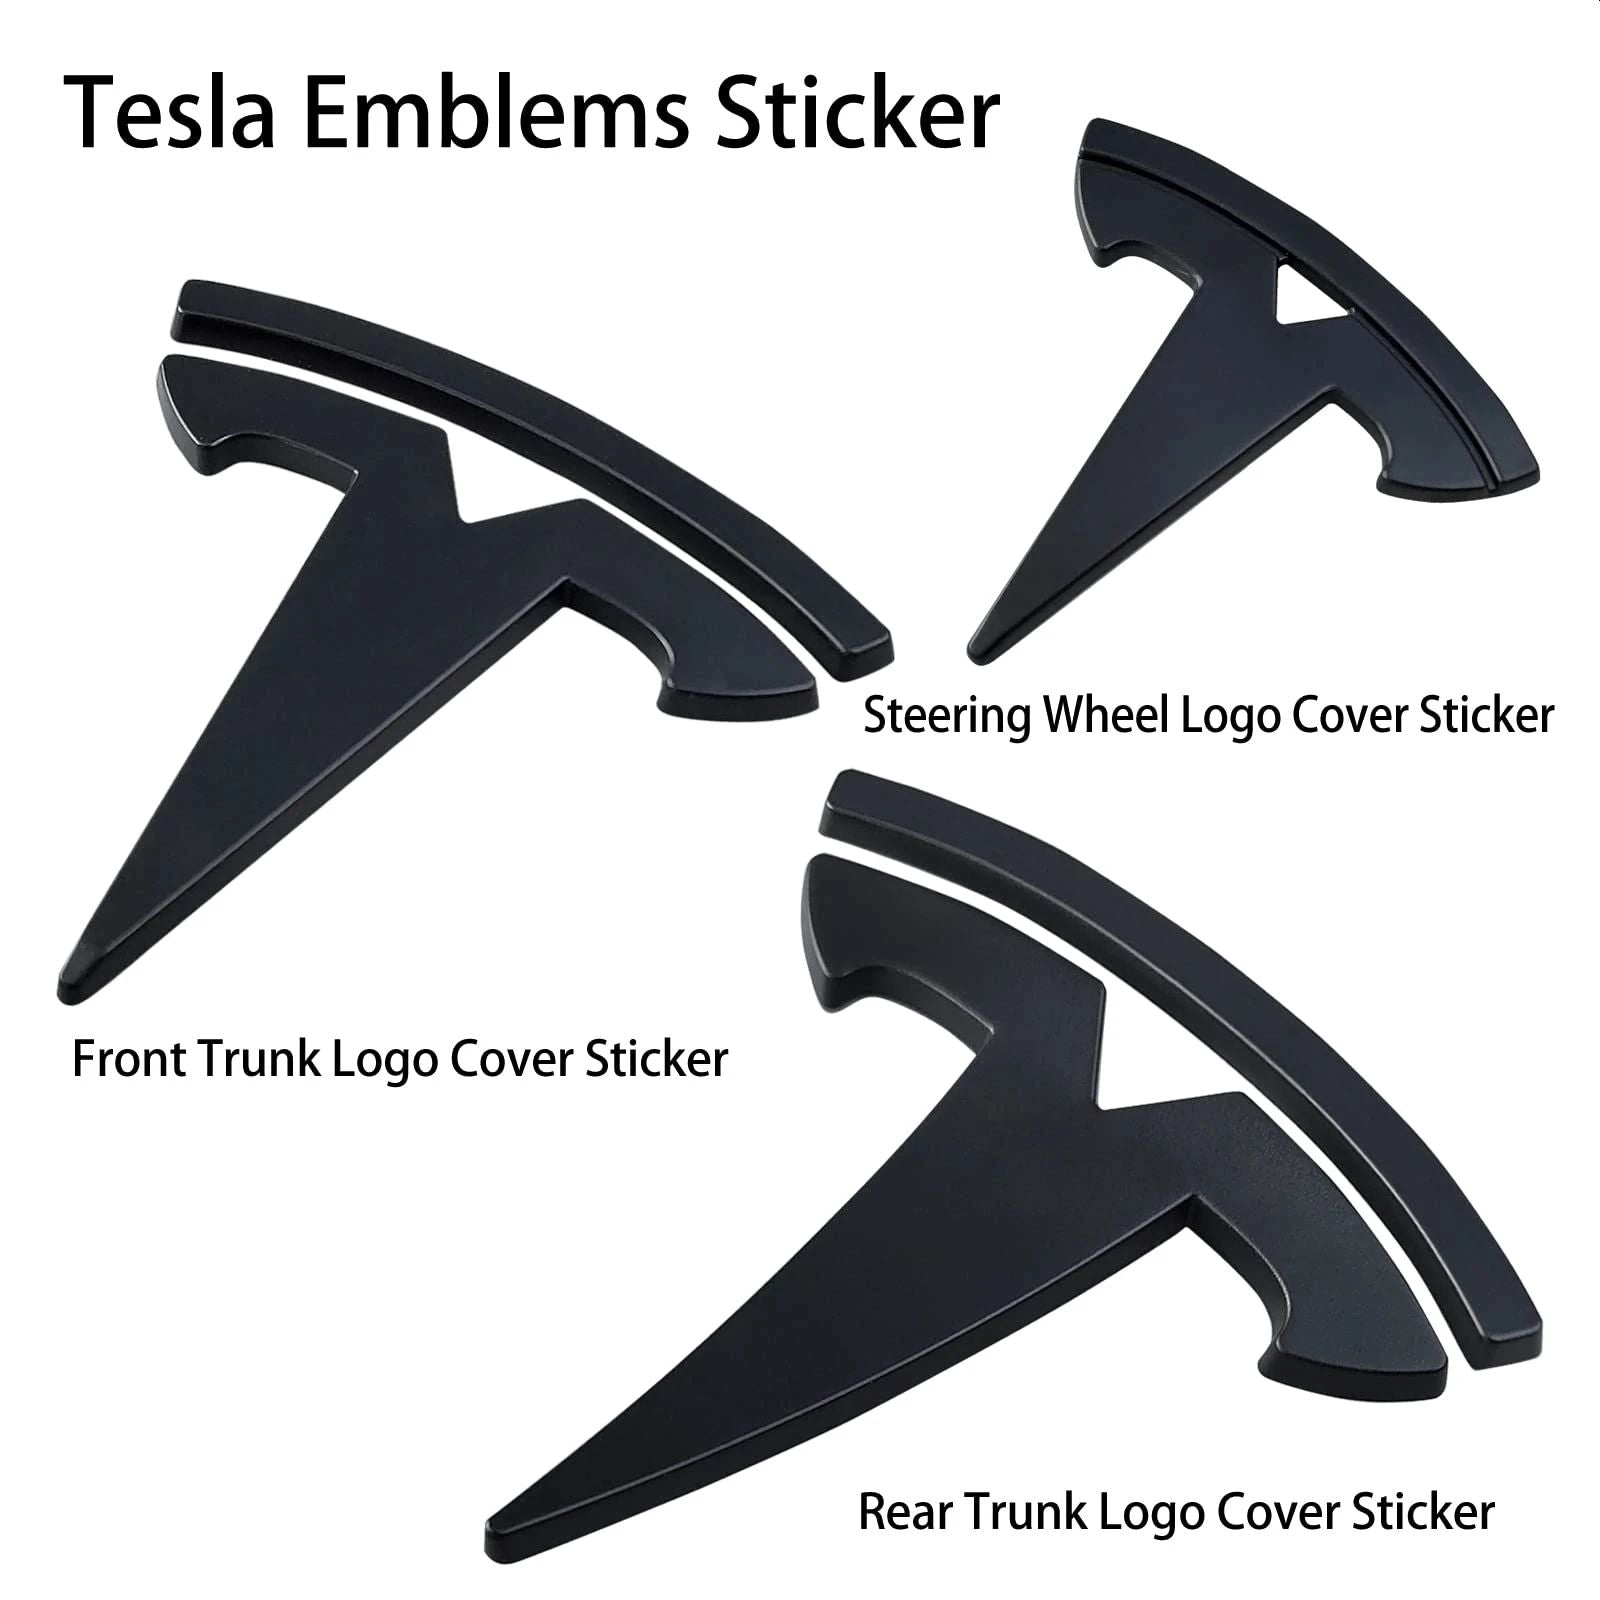 Model 3 Badge Covers (3-Pack)